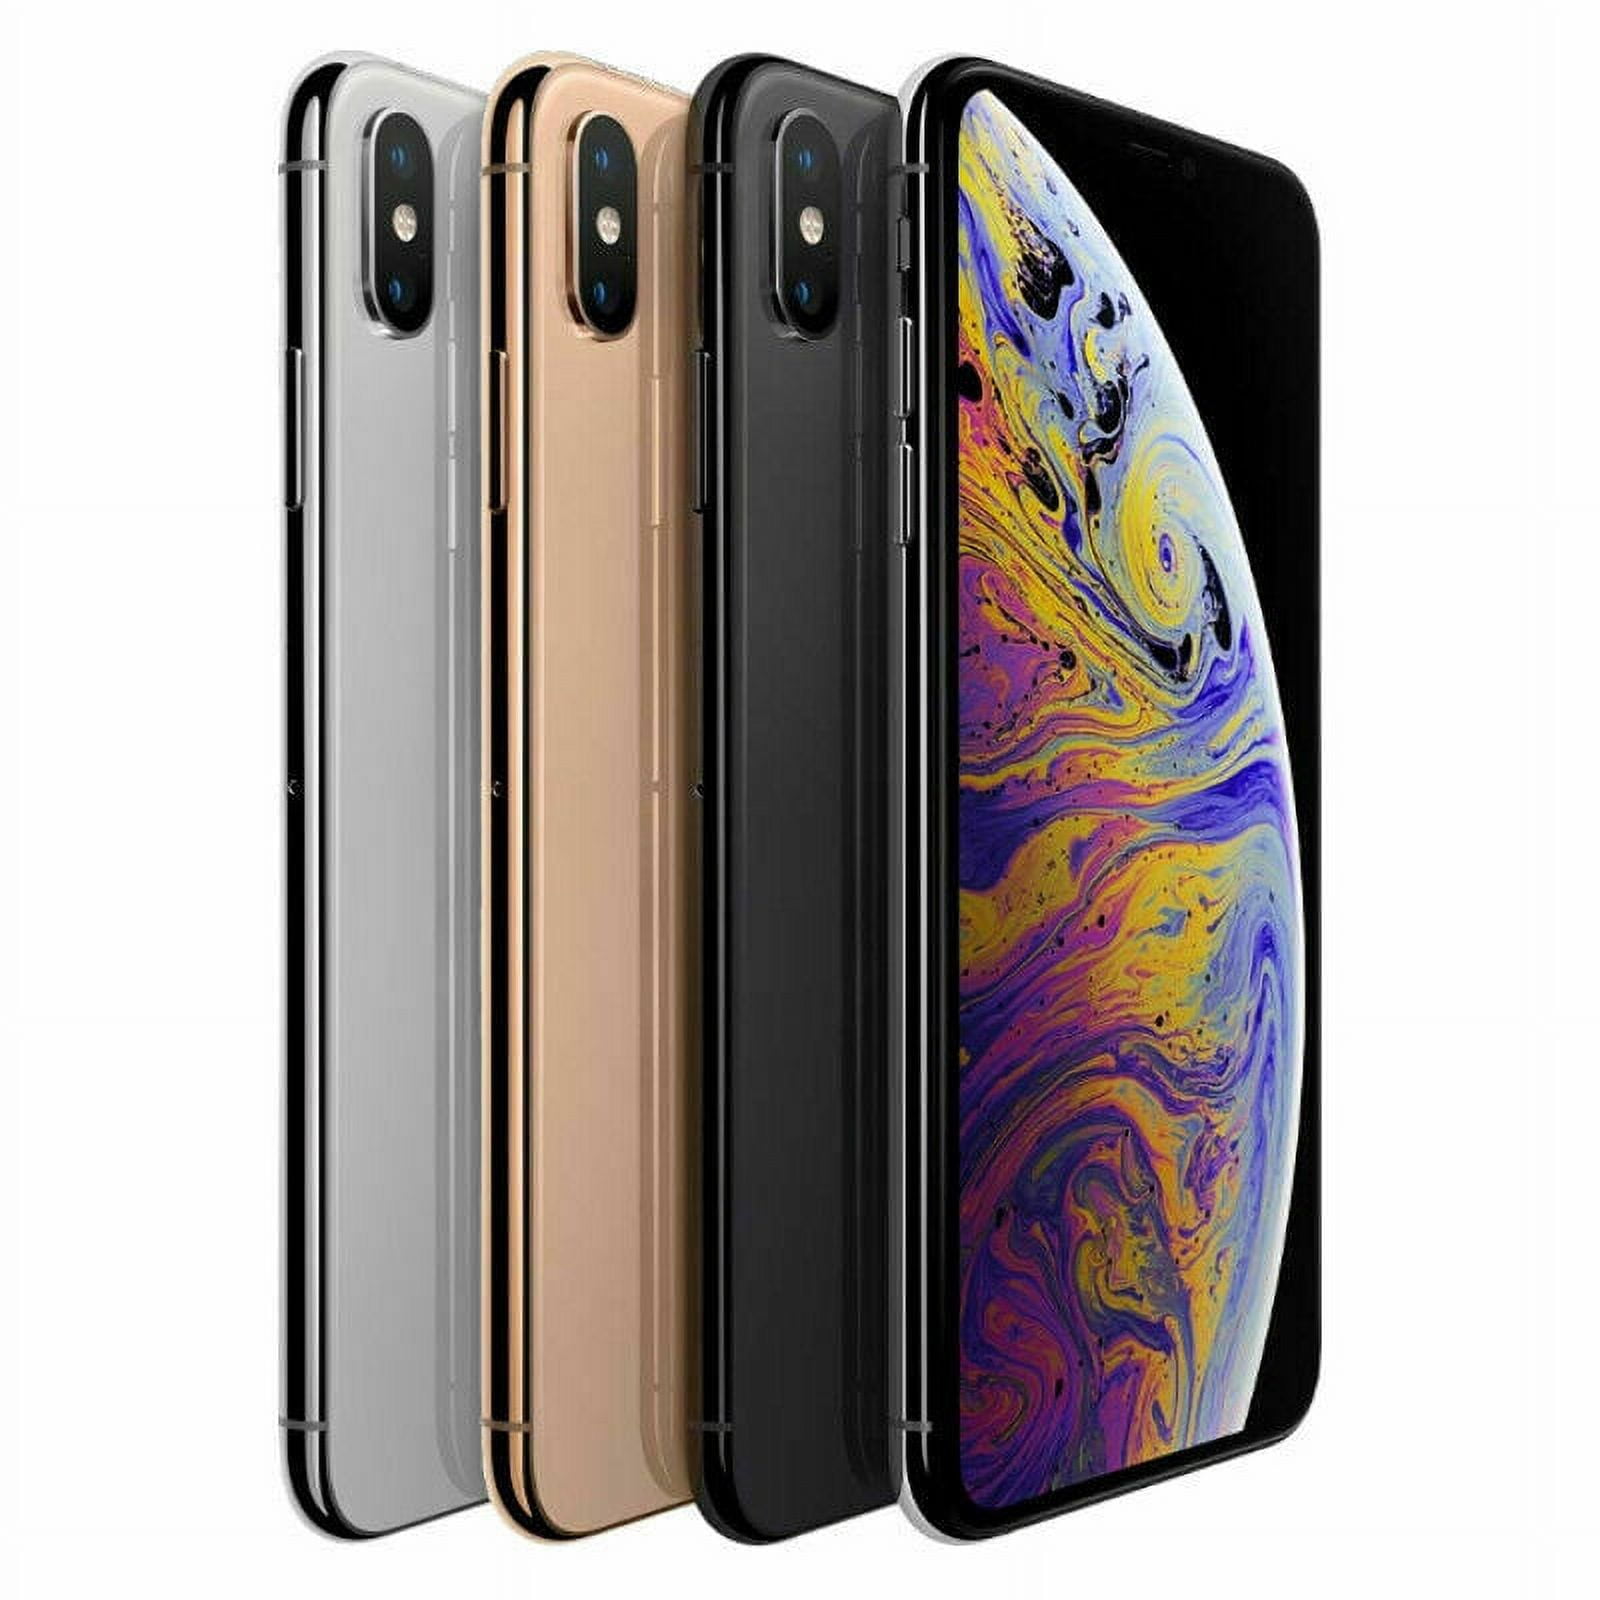 Pre-Owned Apple iPhone XS Max 64GB 256GB 512GB All Colors - Factory  Unlocked Smartphone - Very (Refurbished: Good)